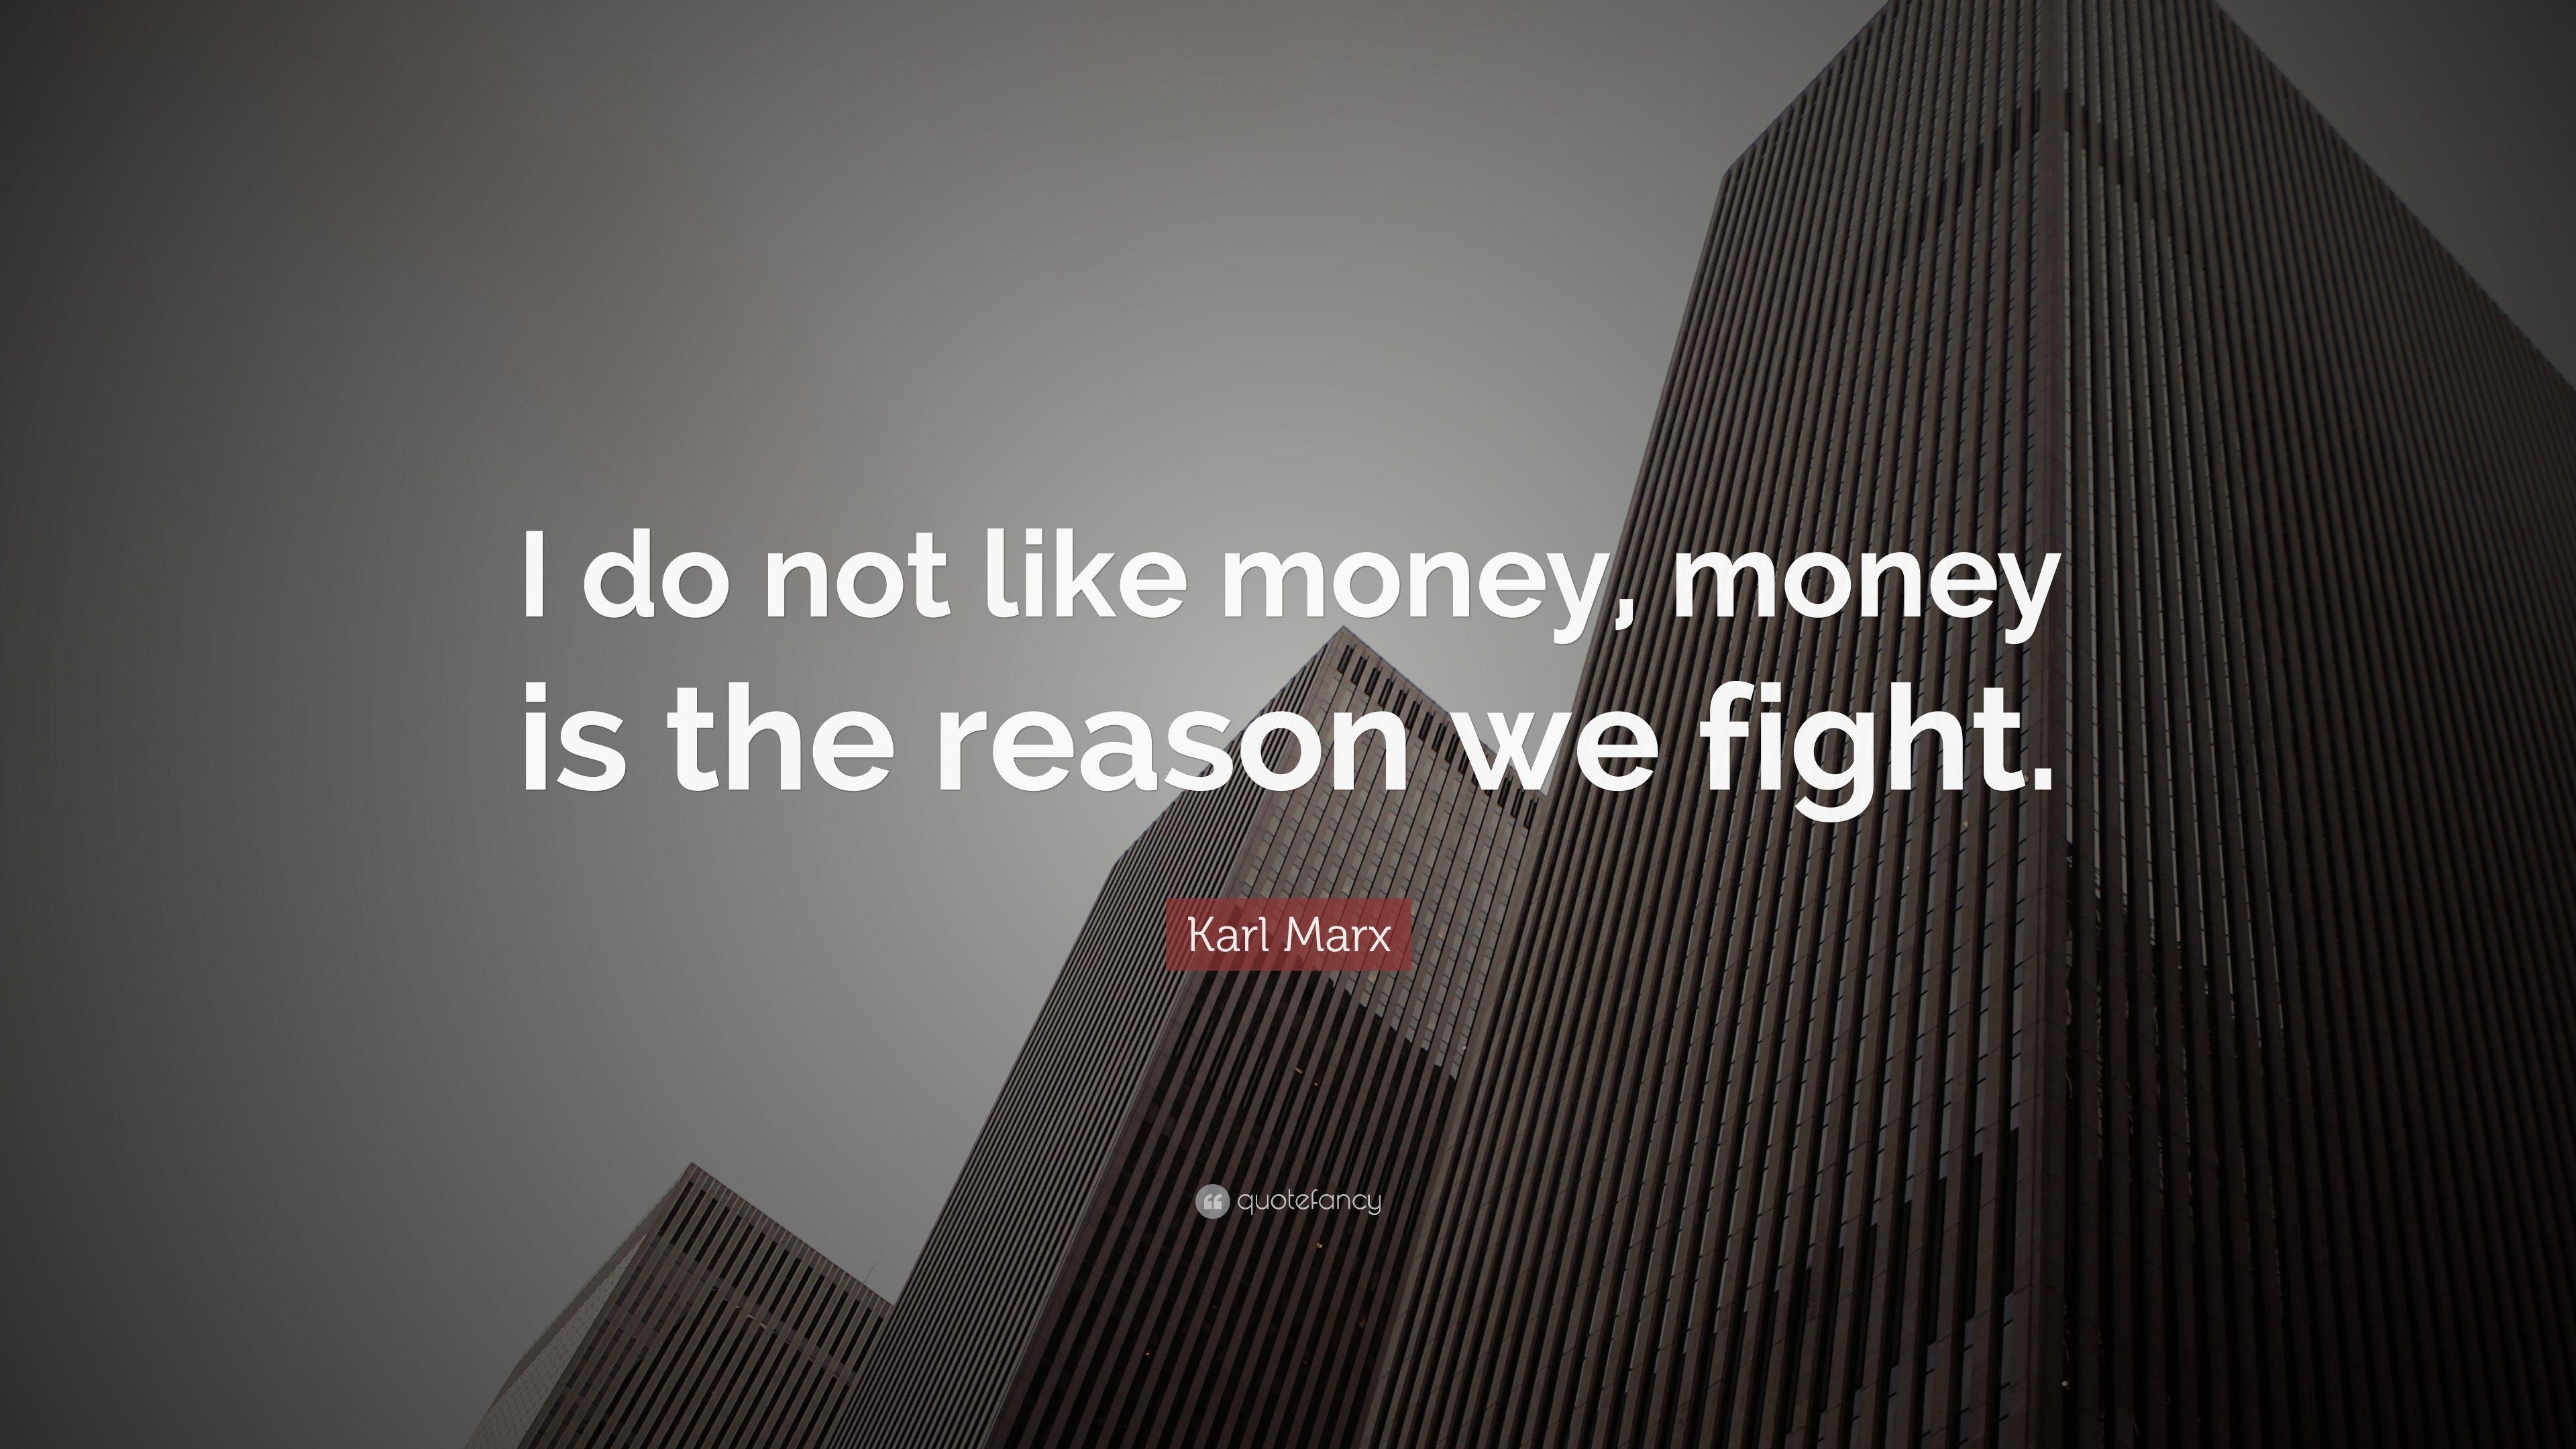 Karl Marx Quote: “I do not like money, money is the reason we